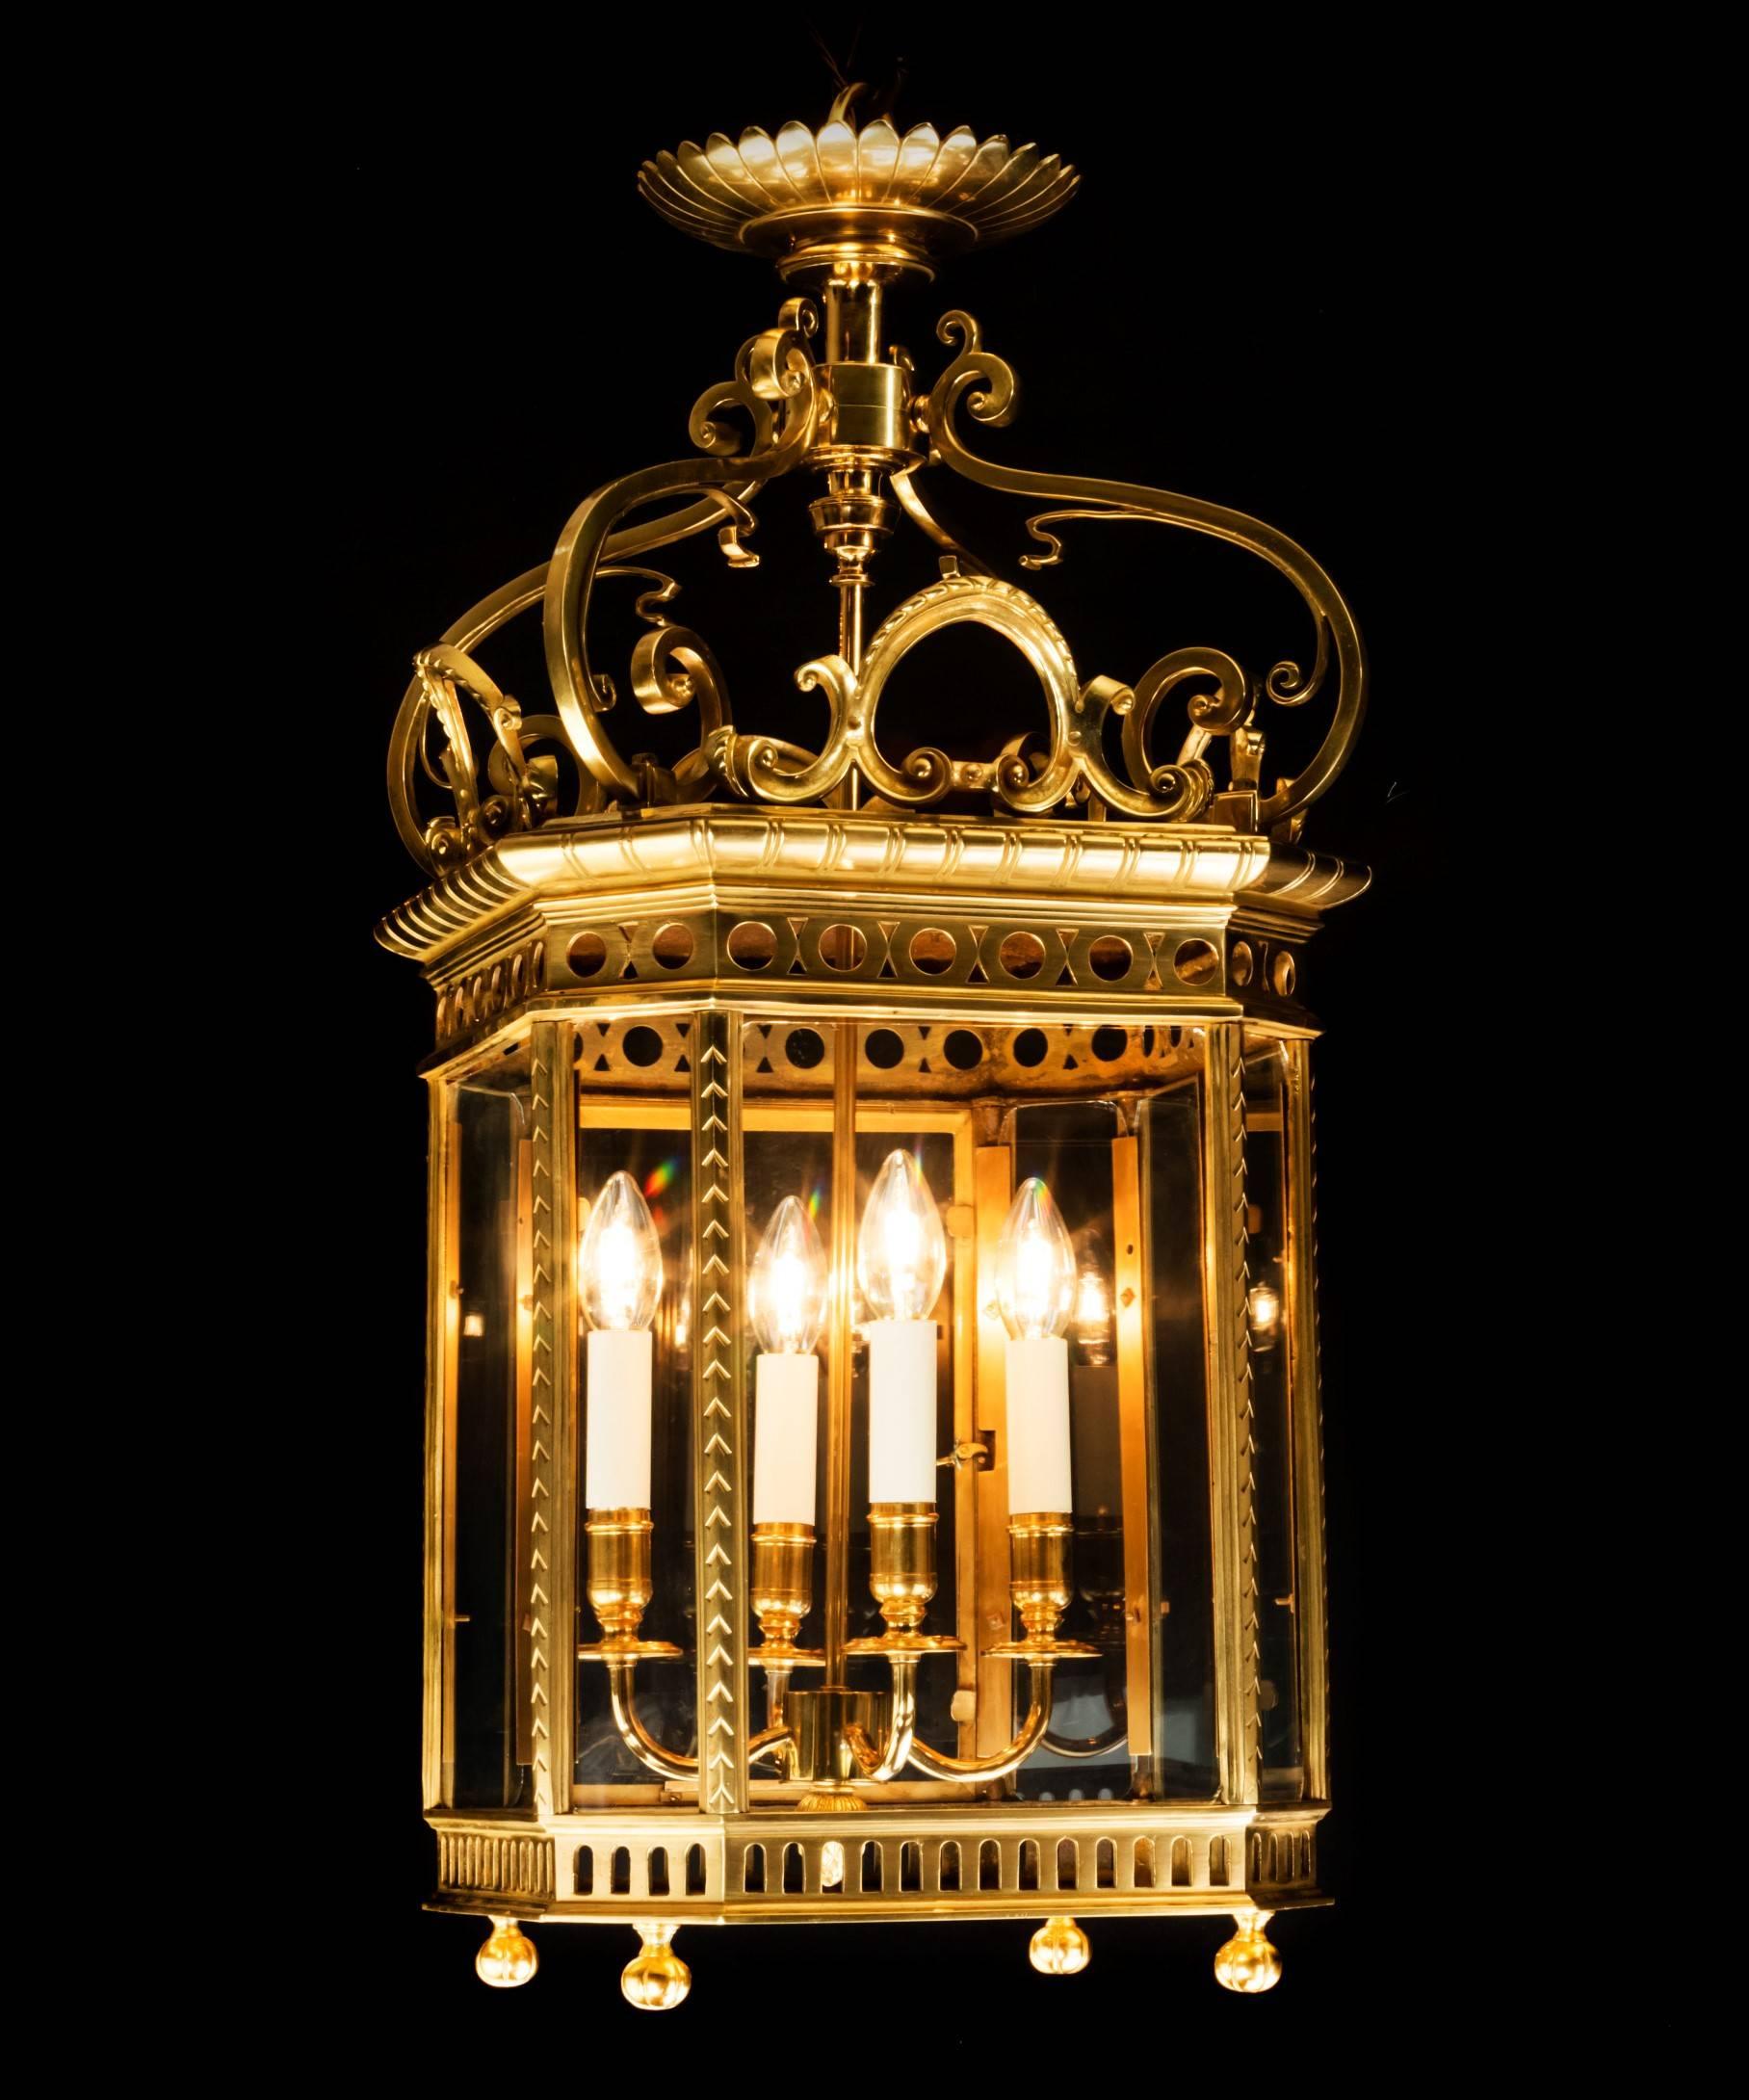 A large 19th century polished brass lantern; the basket top above four scrolling candle arms; the base with upturned finials. This lantern is larger than most examples having four candle arms and is perfect for a large hallway. The lantern has been